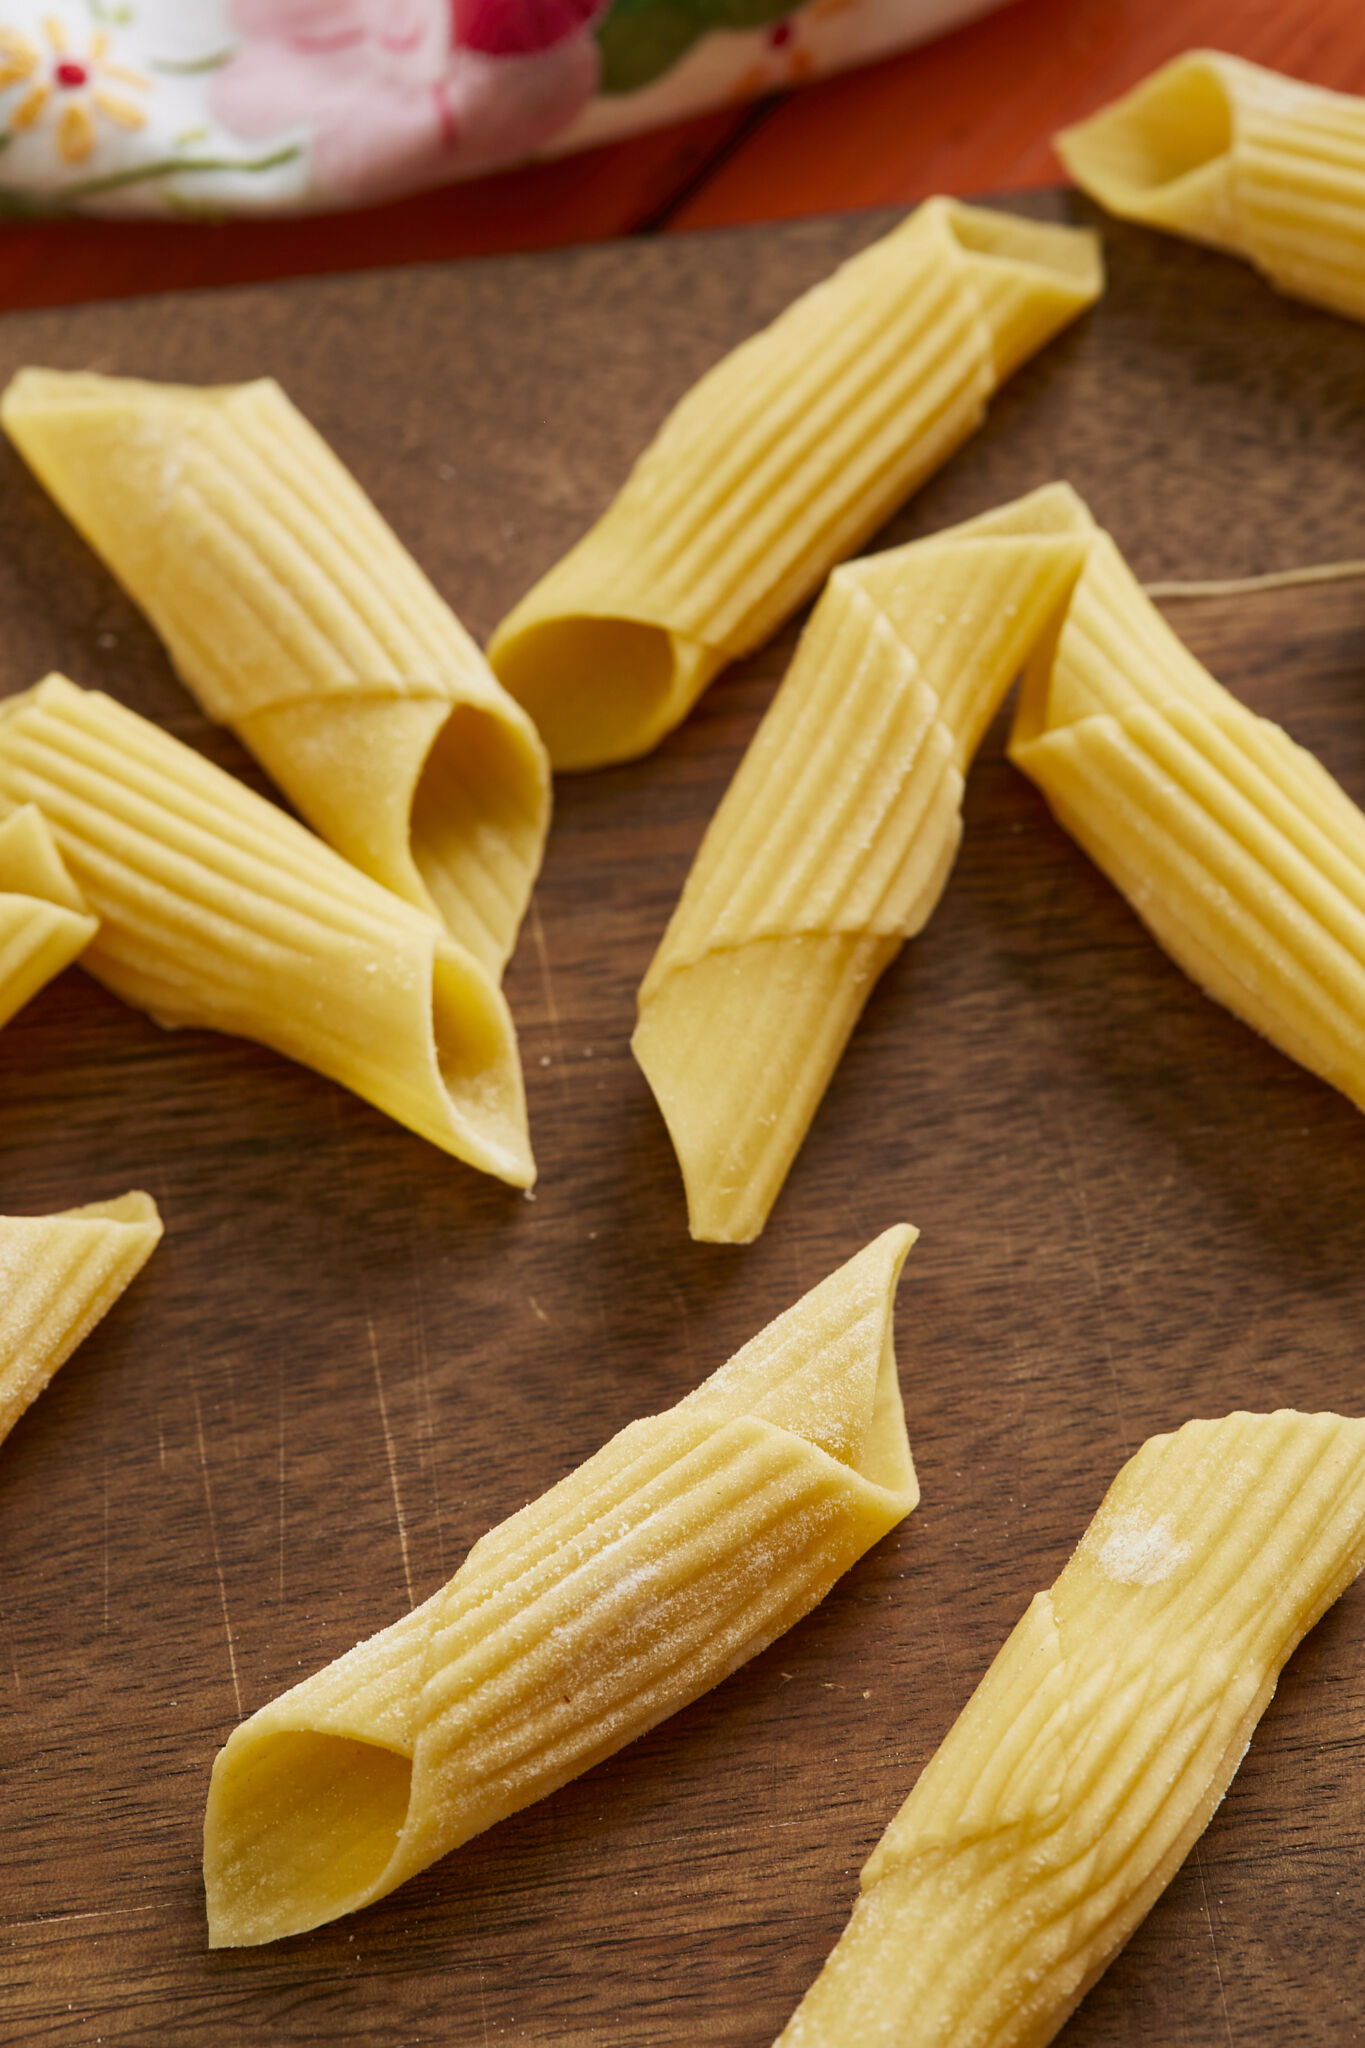 Penne pasta is drying on a wooden board. It's in a tubular-shape cut diagonally on the ends and resembles an old-fashioned writing quill that was dipped in ink. 